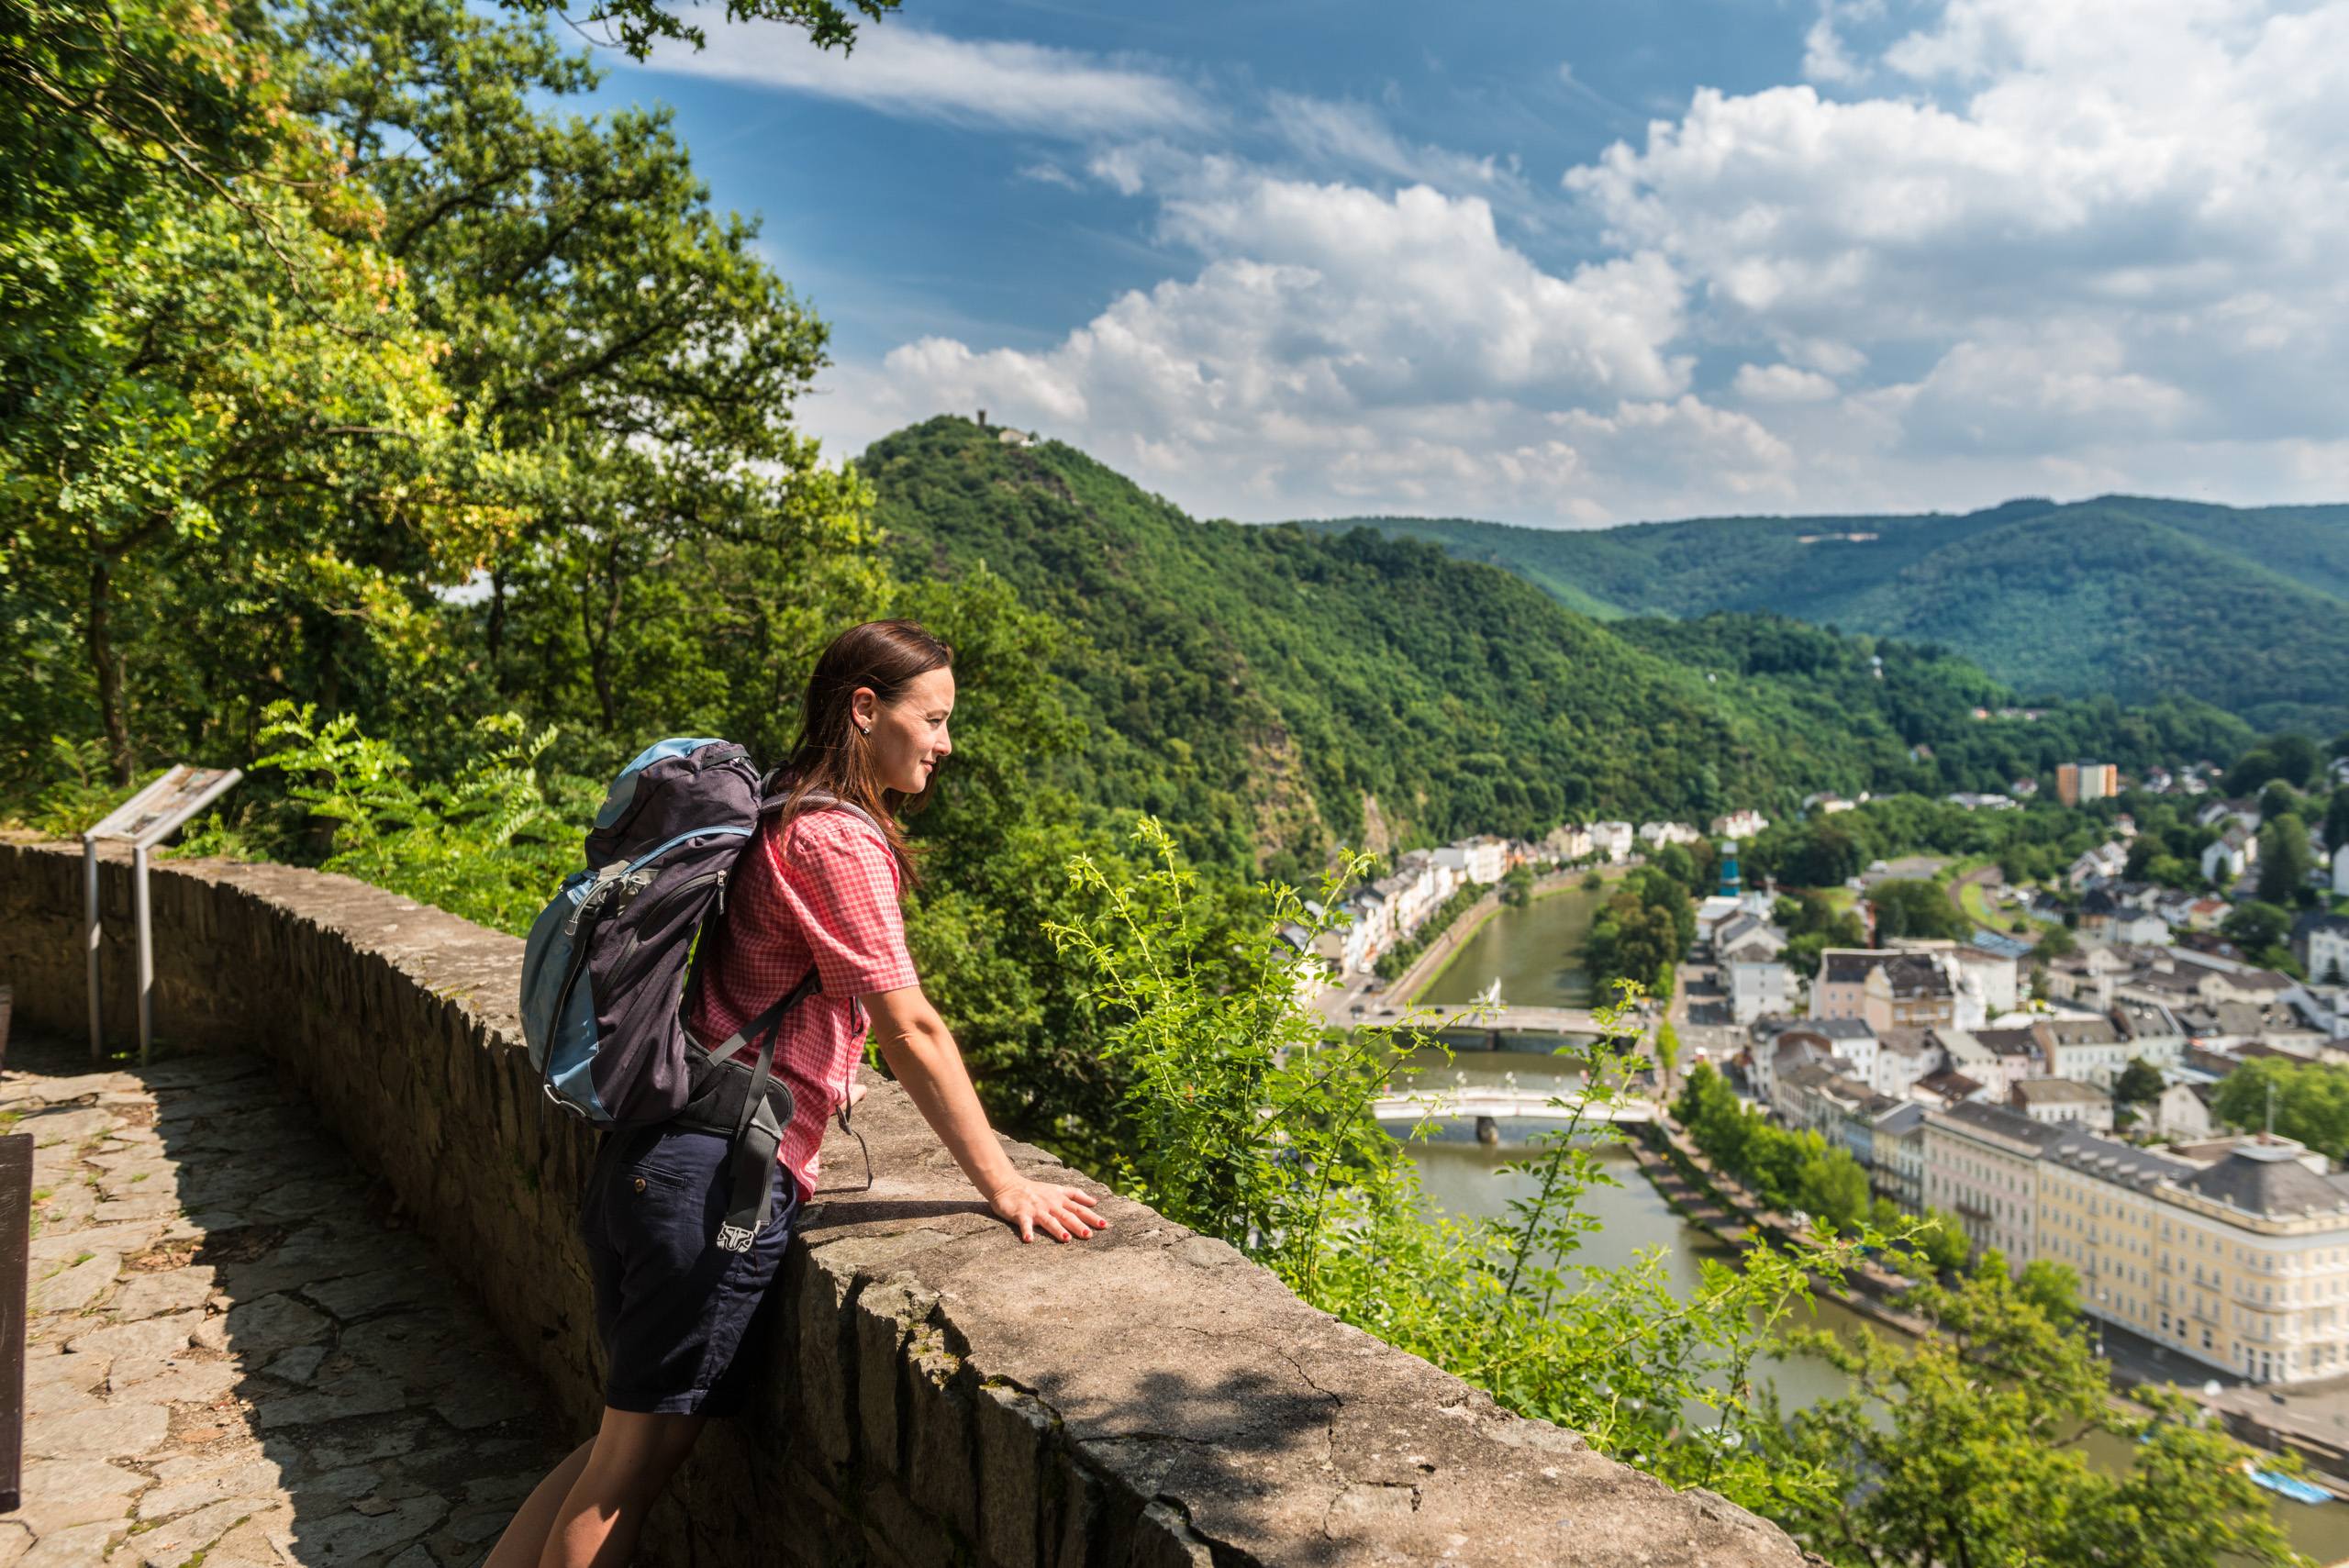 The footpaths in the therapeutic landscape above Bad Ems have many lookouts and view points from where you can admire the town and appreciate its location in the steep-sided valley.